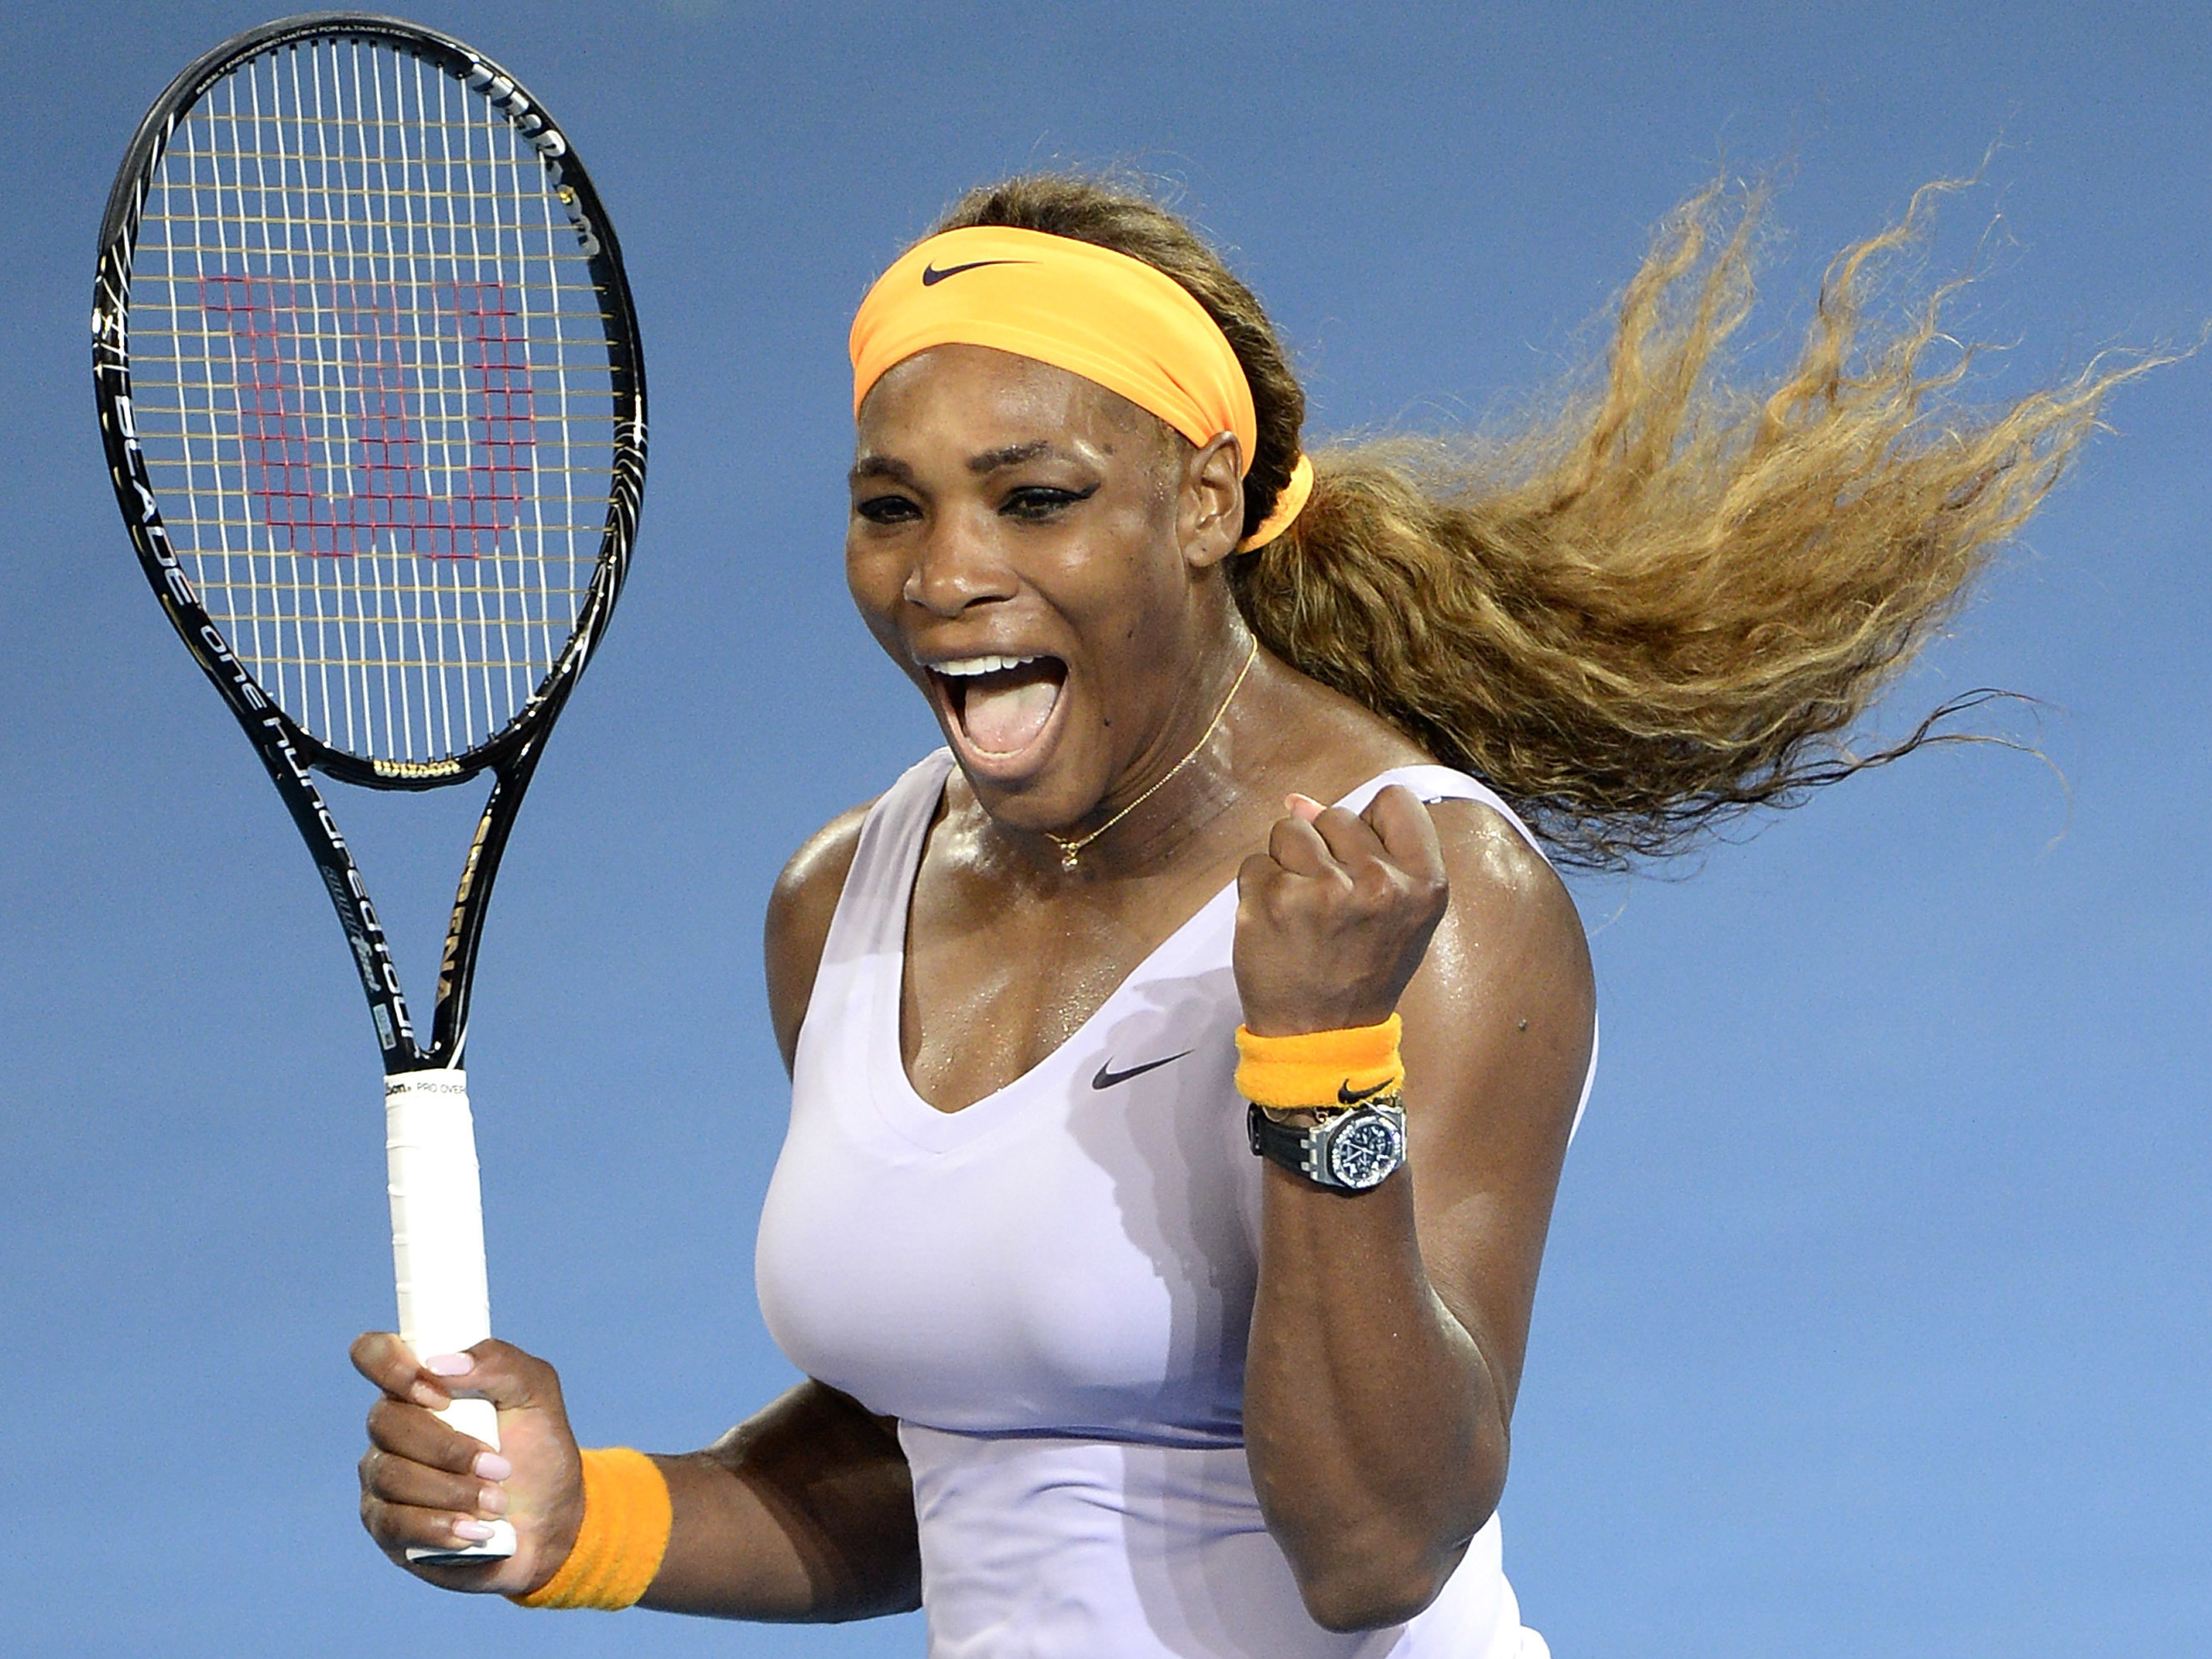 Serena williams says she intends to retire from tennis after the us open